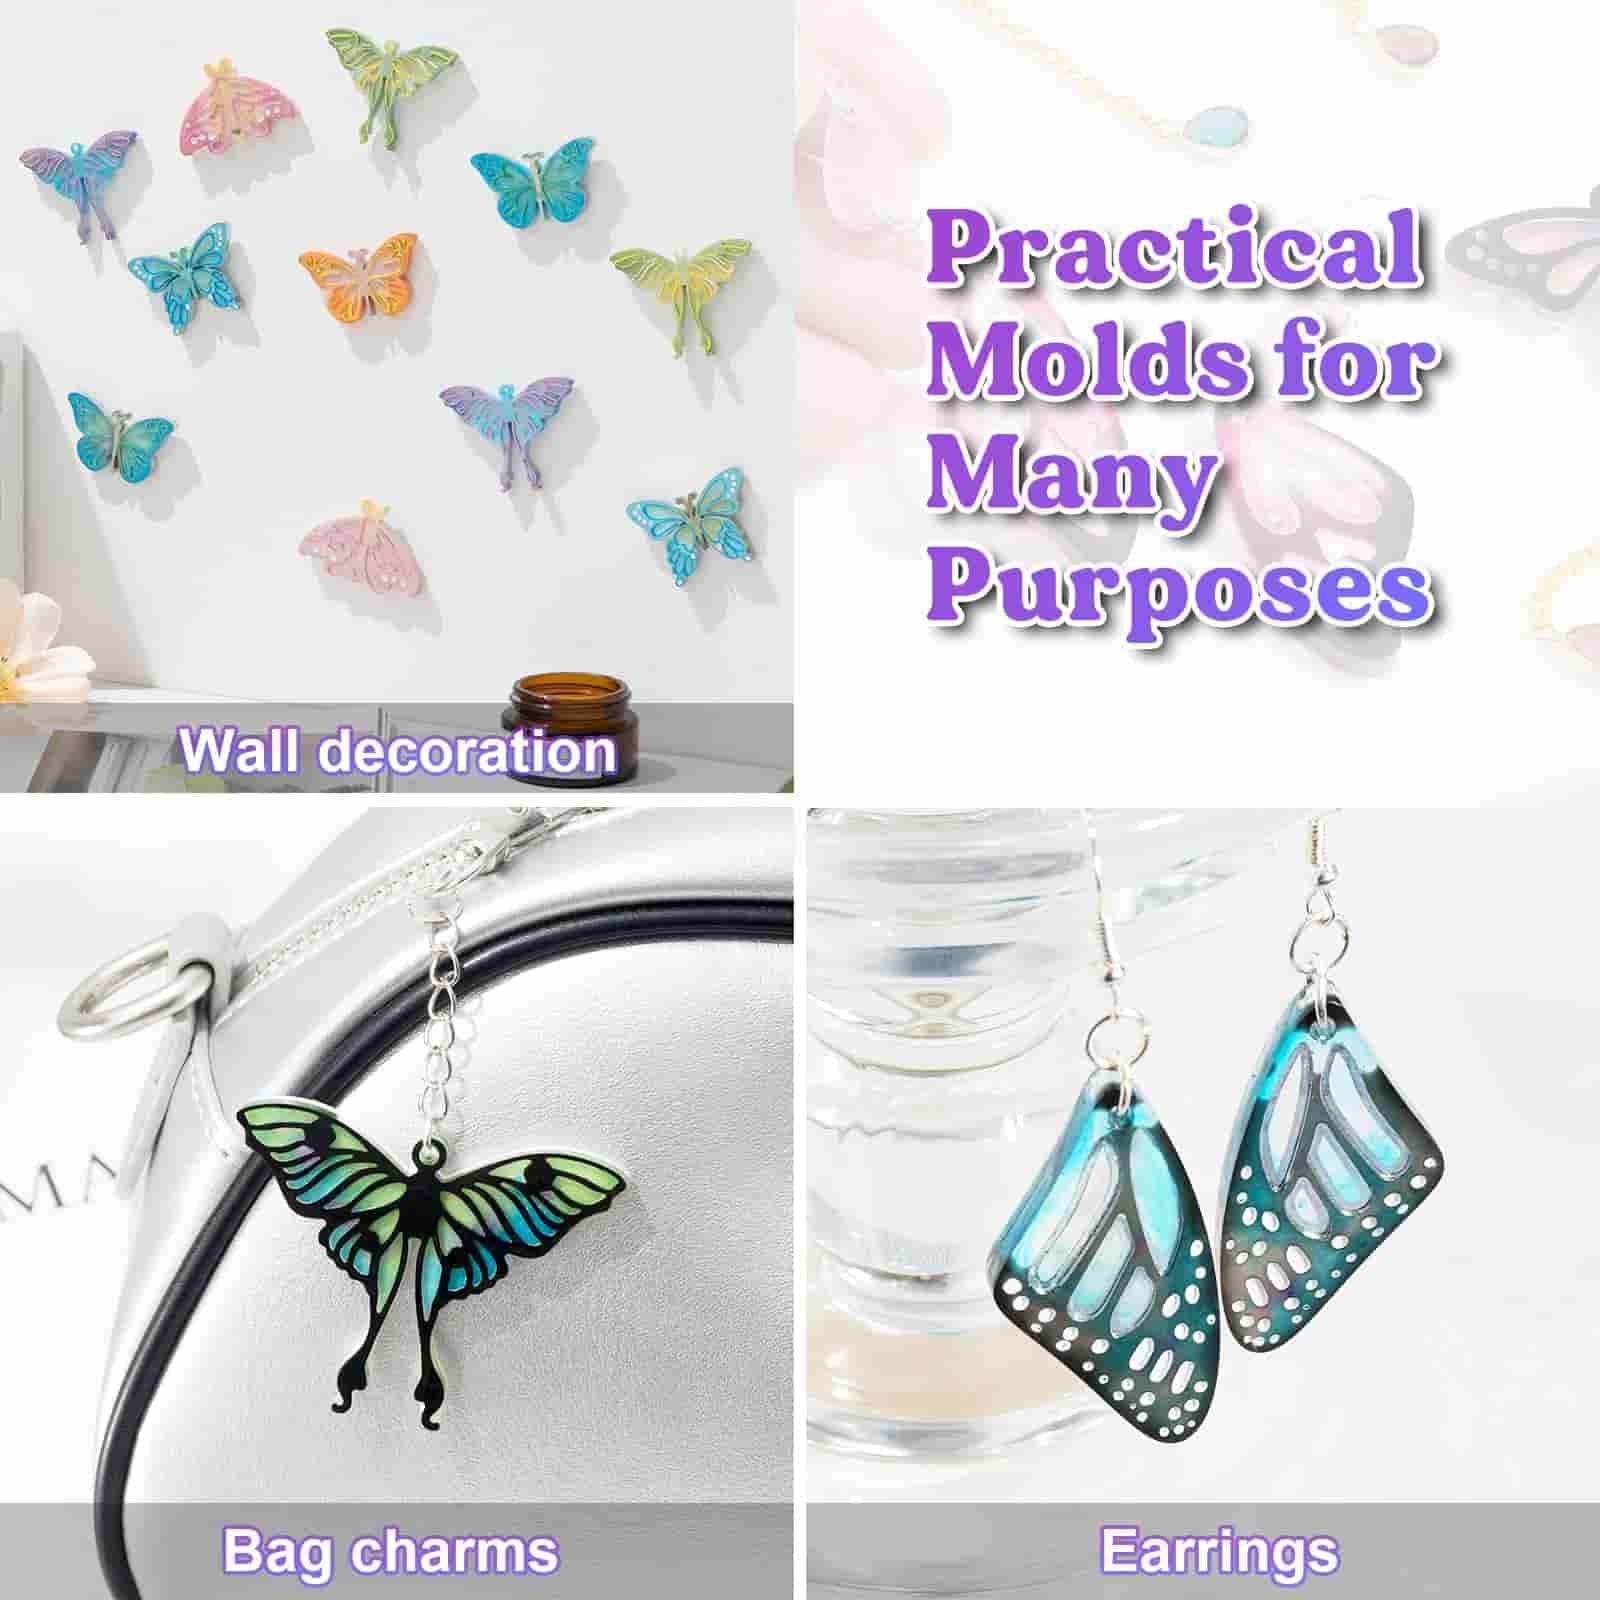 resin product which can be wall decoration, bag charms and earrings